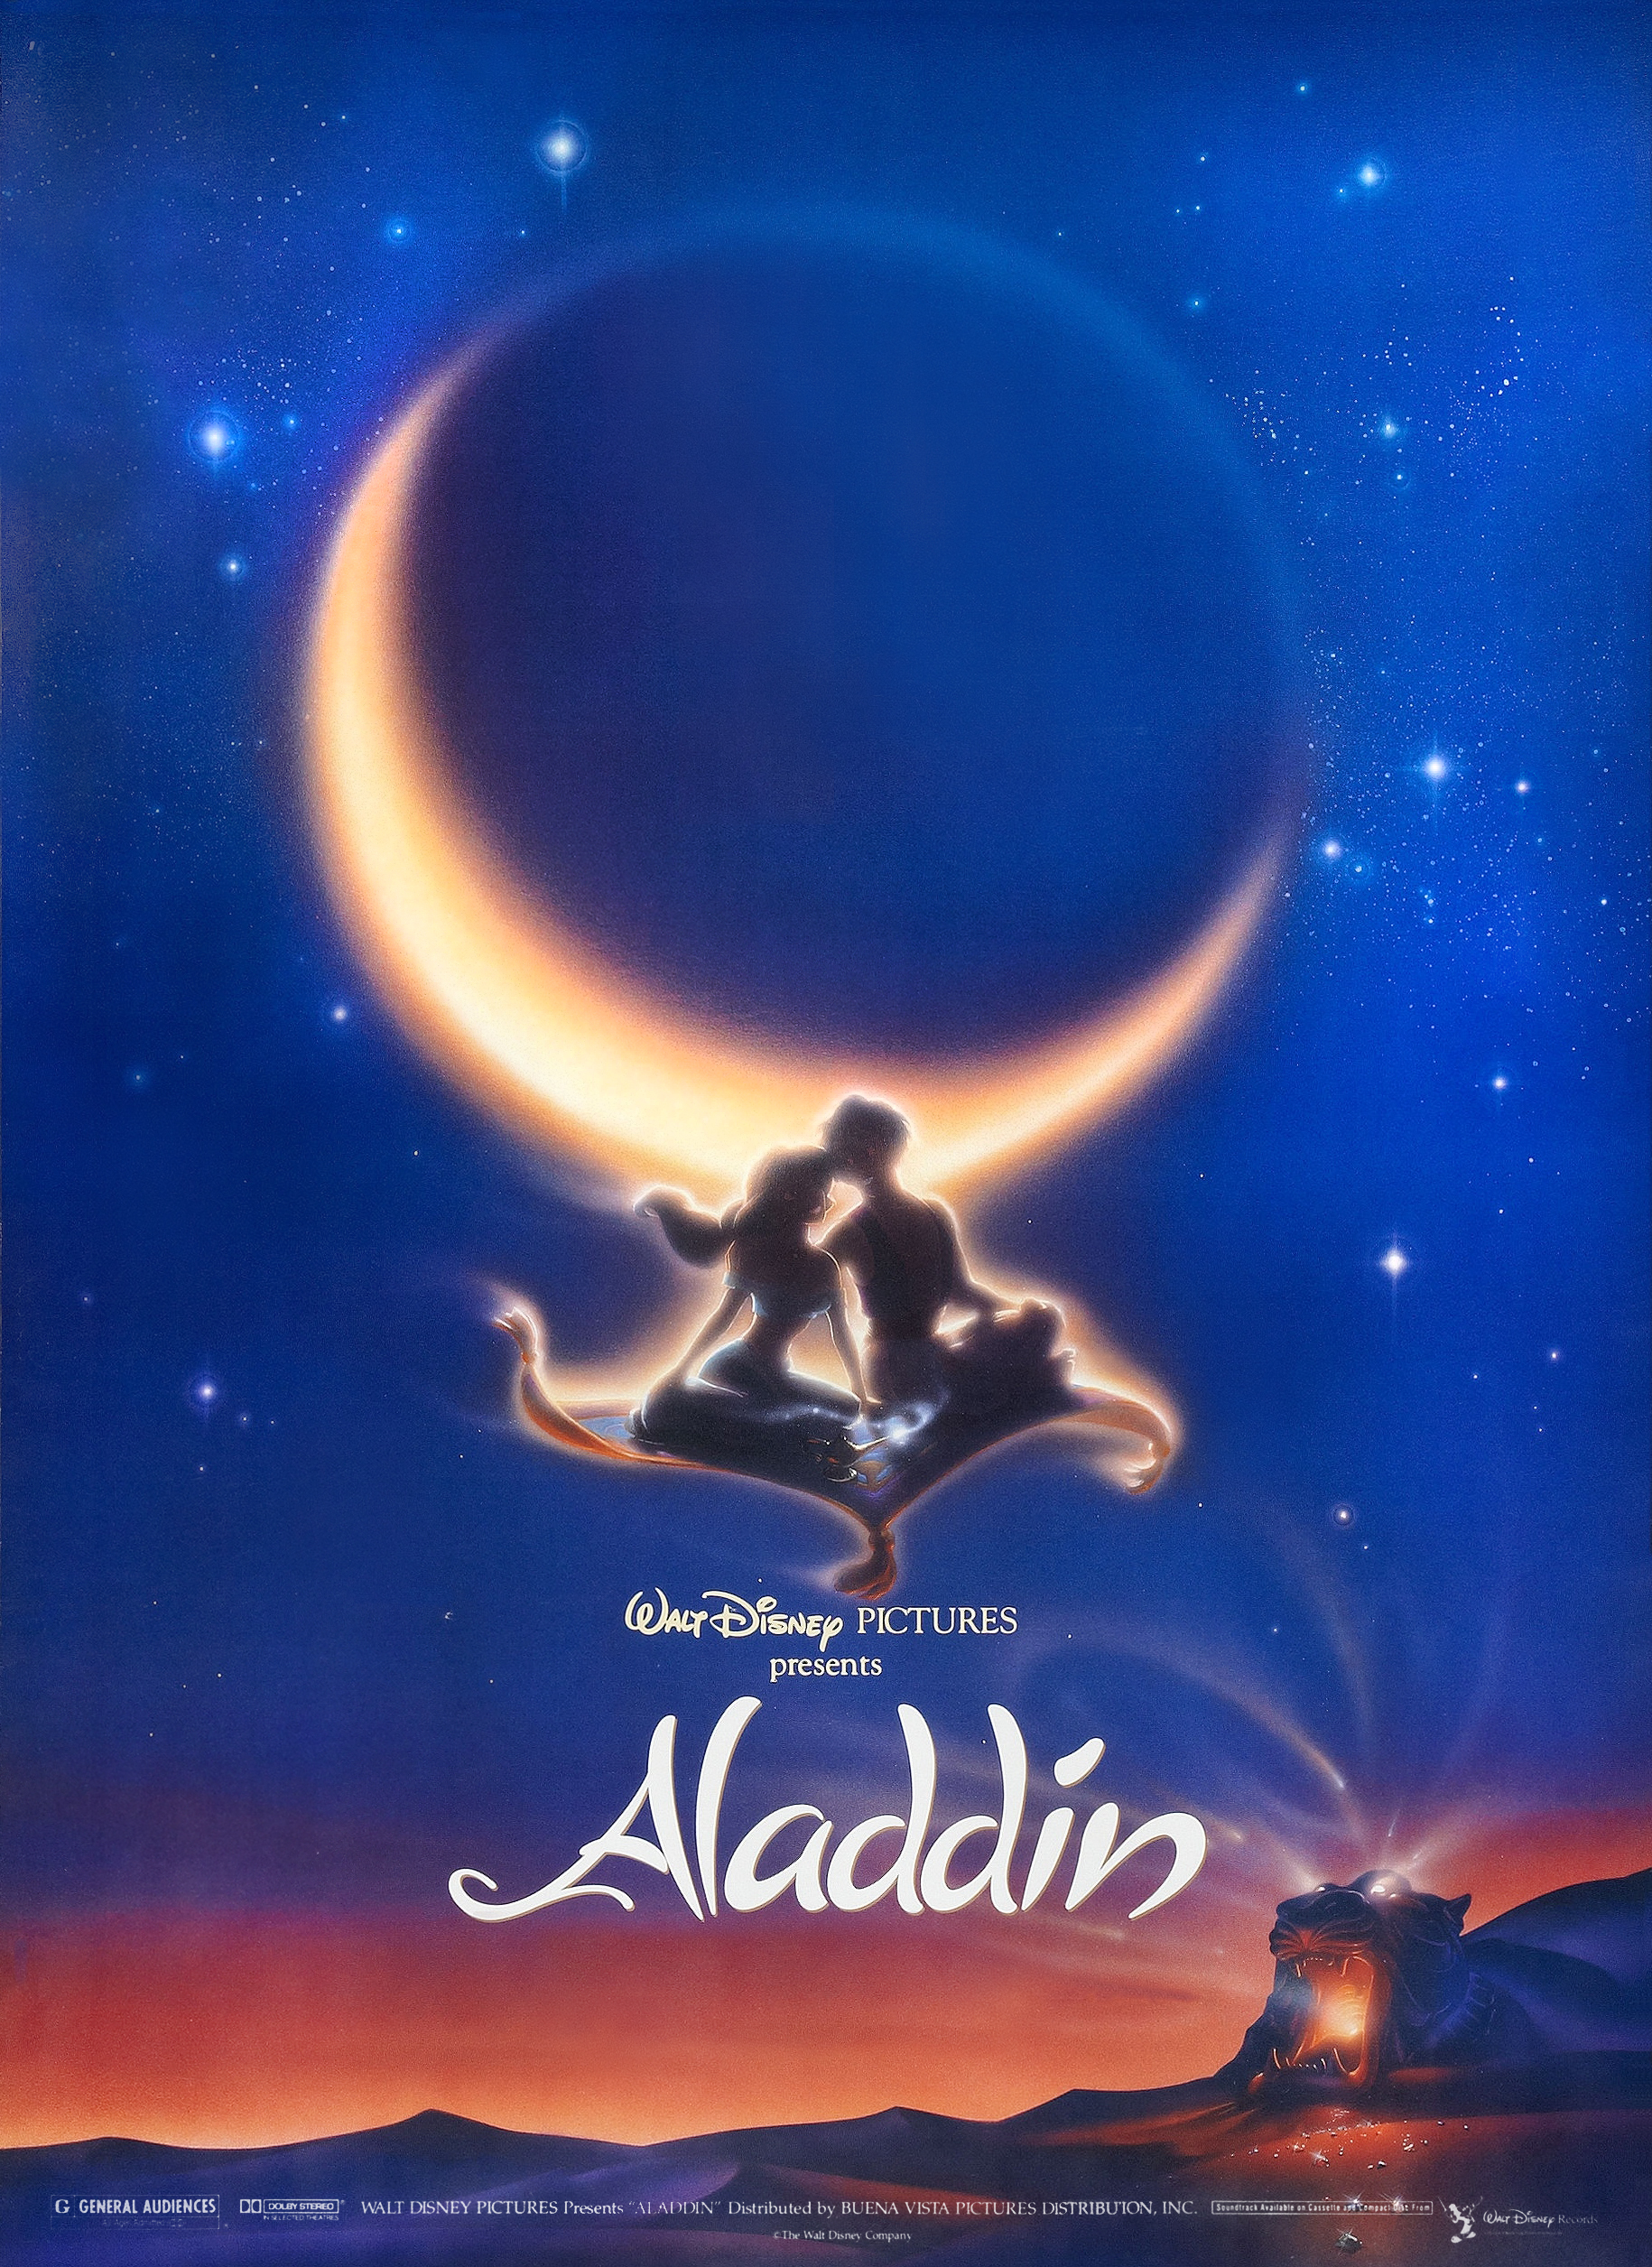 Aladdin instal the last version for iphone